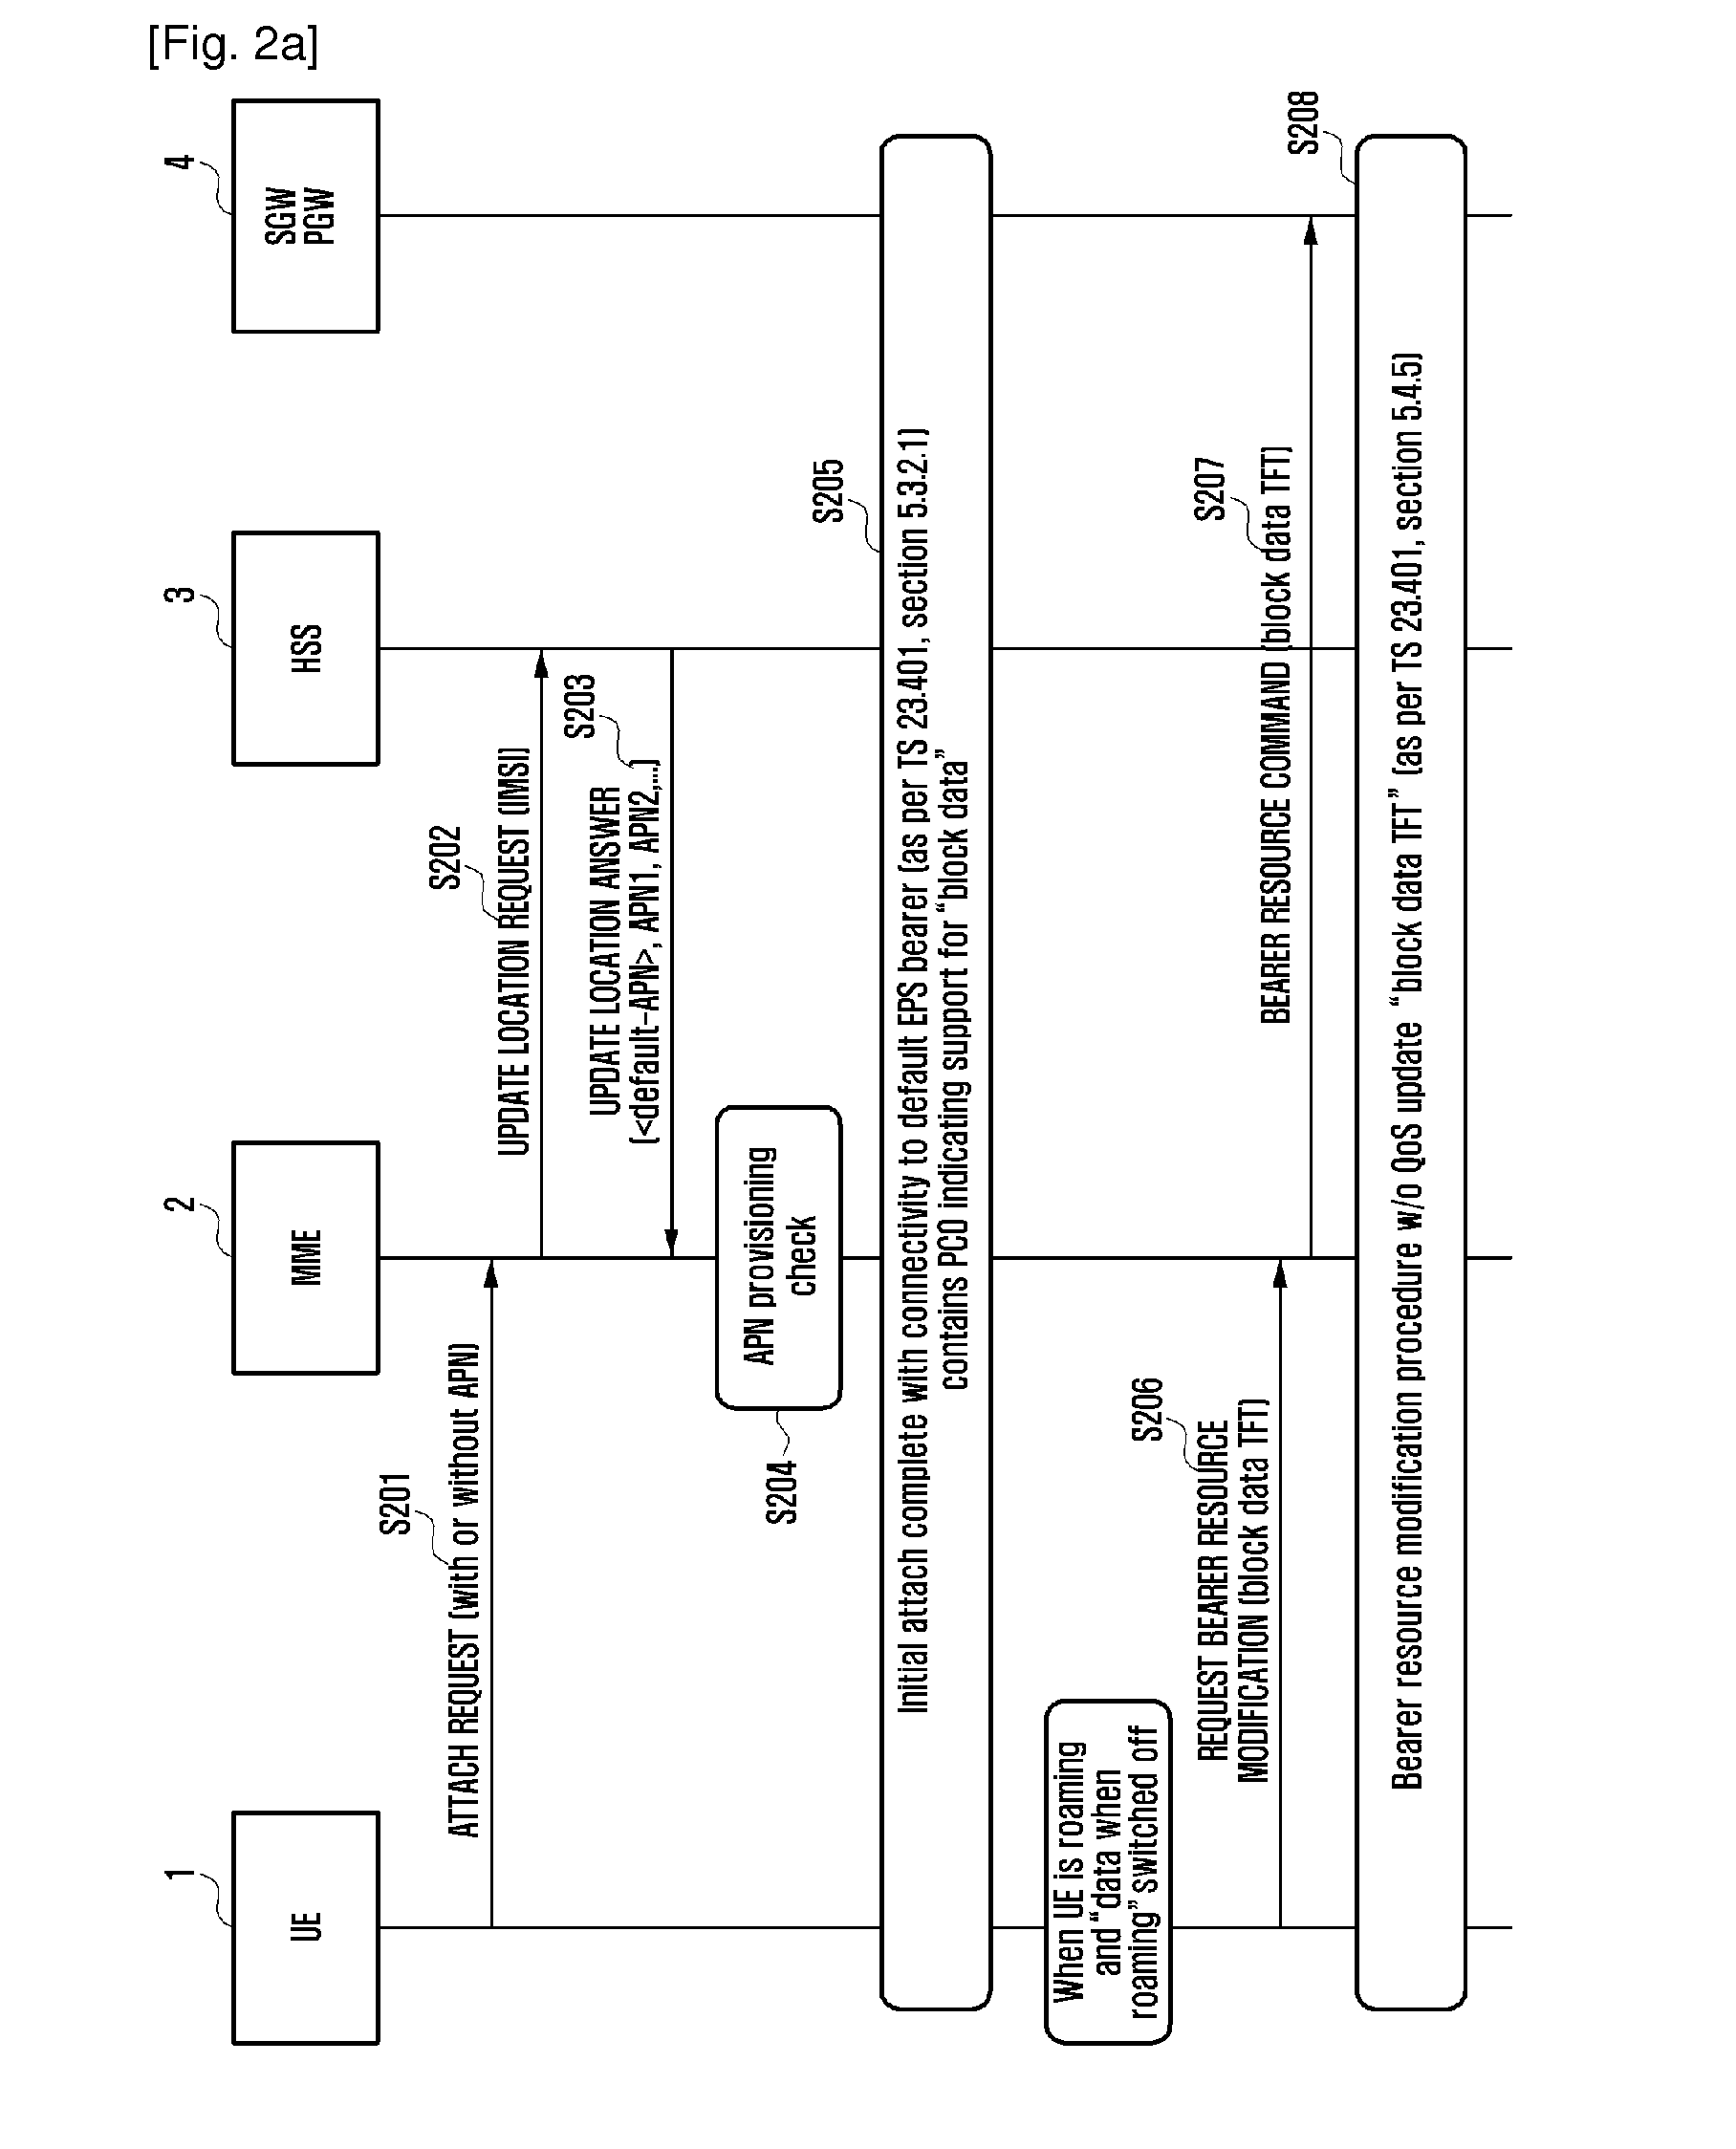 Controlling data transmission between a user equipment and a packet data network